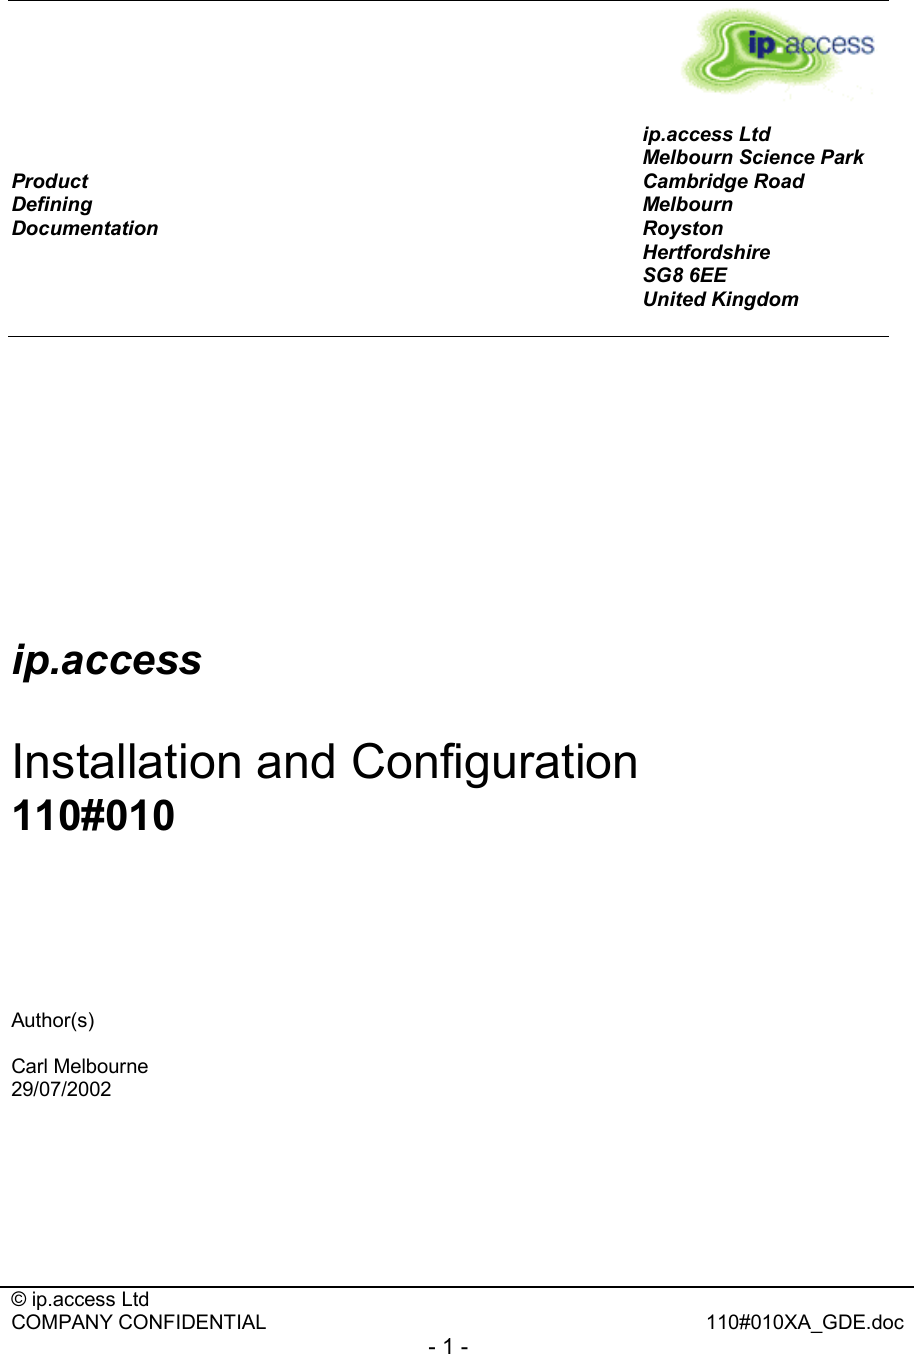  © ip.access Ltd   COMPANY CONFIDENTIAL  110#010XA_GDE.doc - 1 -       Product  Defining  Documentation ip.access Ltd Melbourn Science Park Cambridge Road Melbourn Royston Hertfordshire SG8 6EE United Kingdom        ip.access  Installation and Configuration 110#010      Author(s)  Carl Melbourne 29/07/2002        